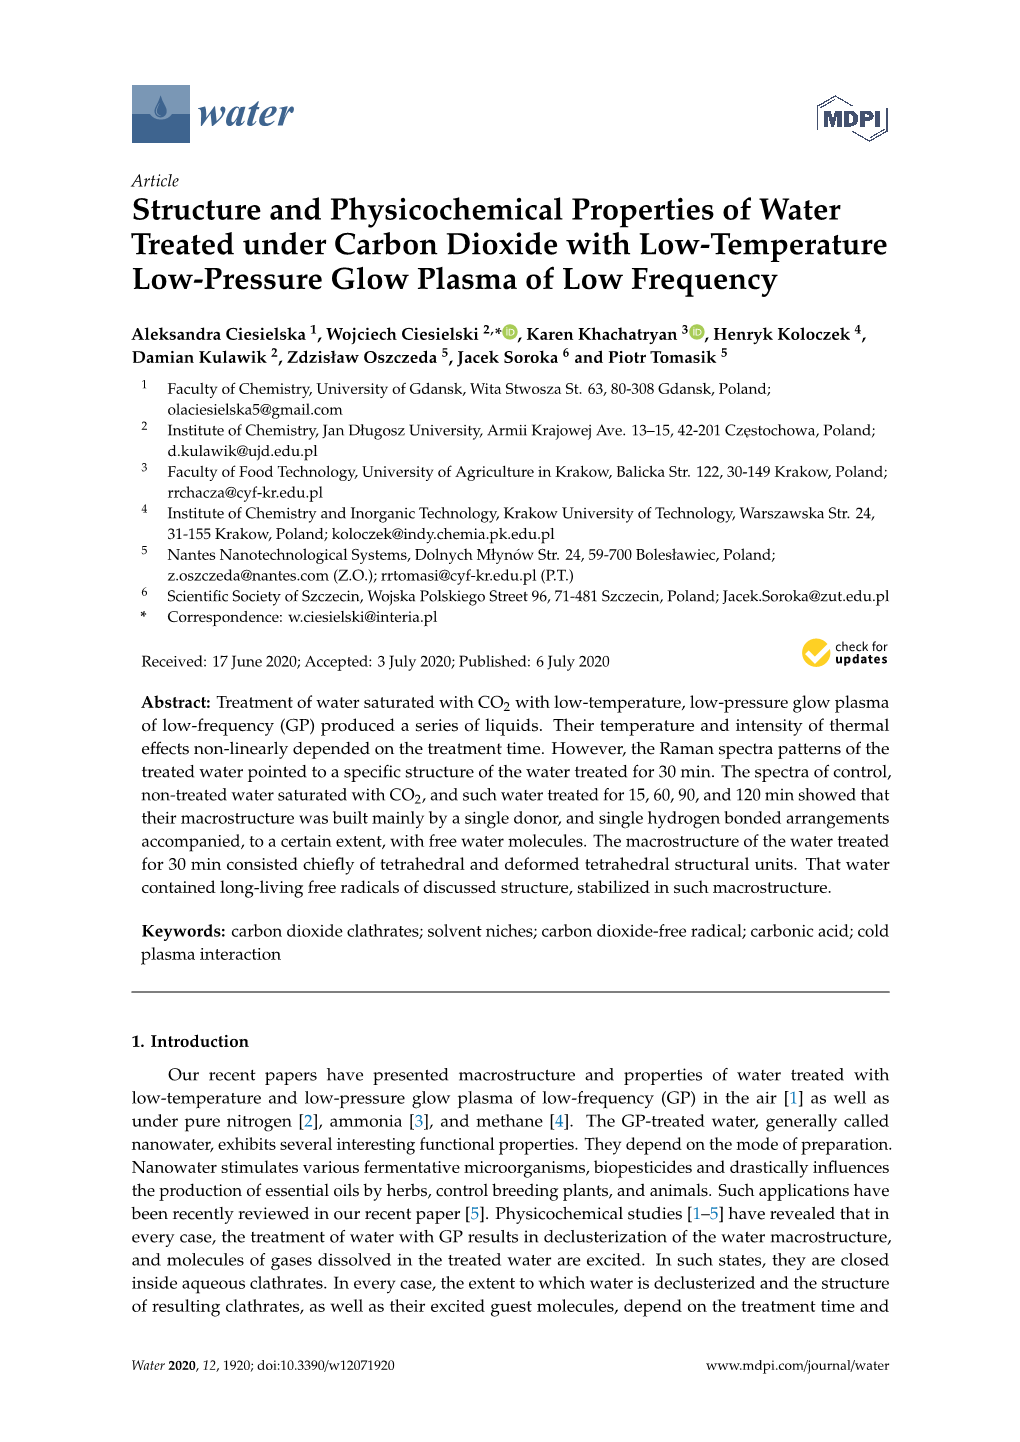 Structure and Physicochemical Properties of Water Treated Under Carbon Dioxide with Low-Temperature Low-Pressure Glow Plasma of Low Frequency